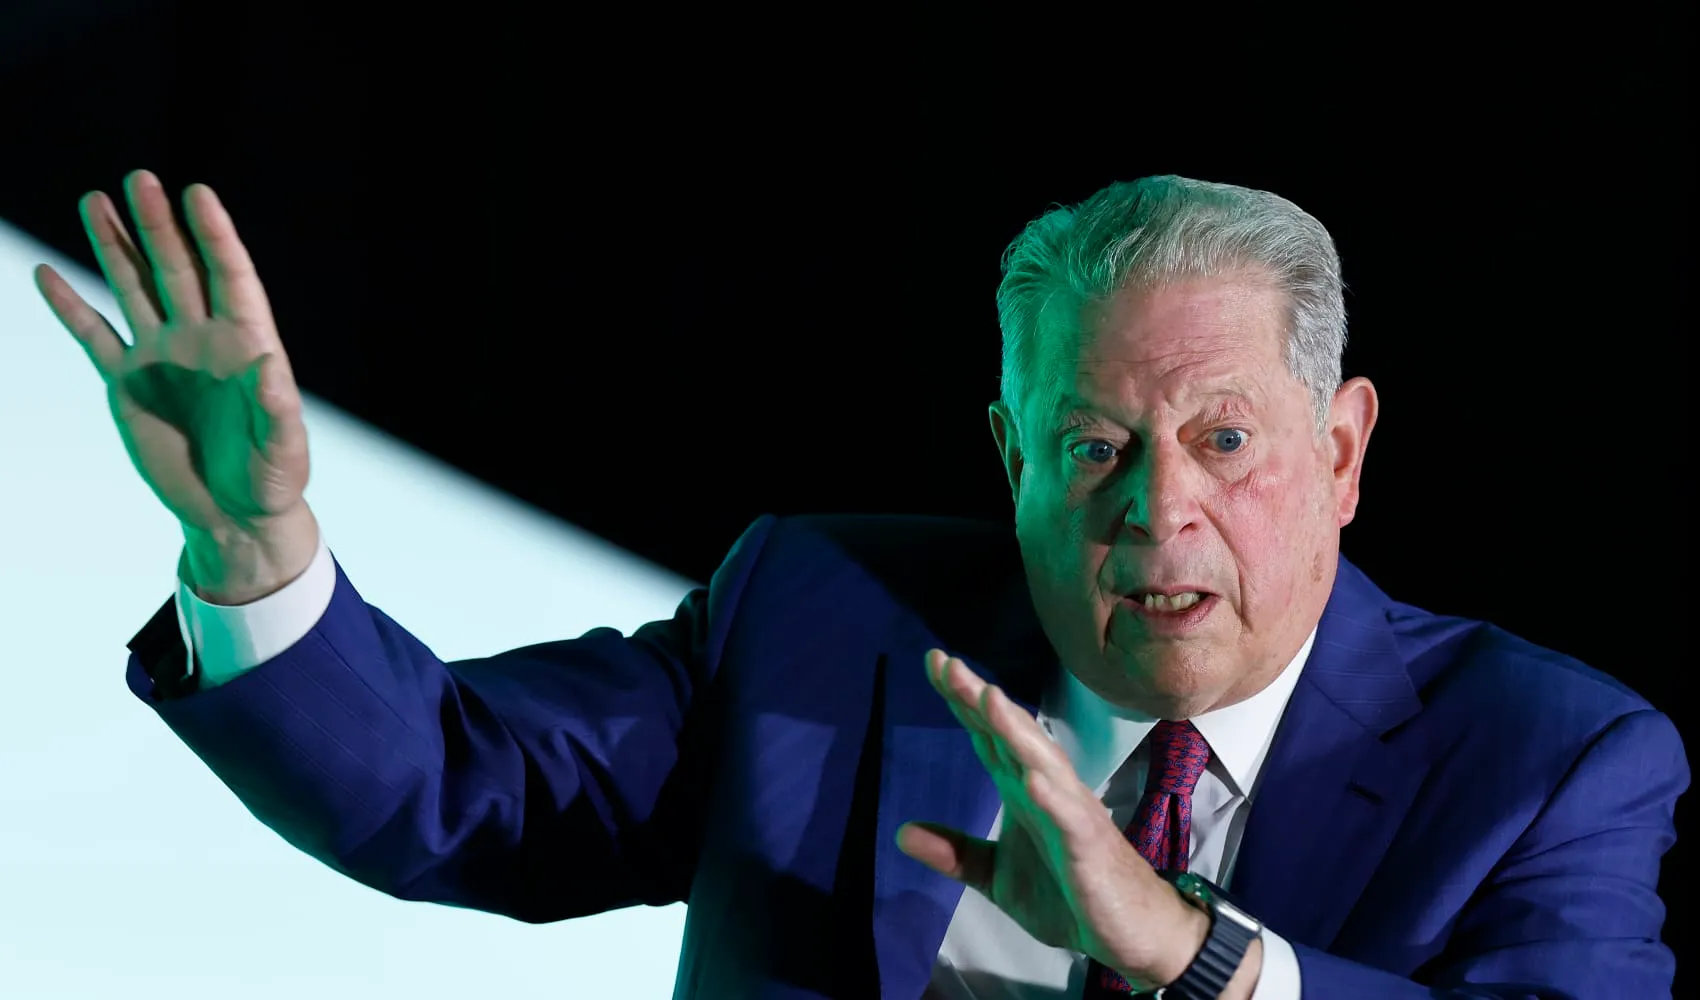 Al Gore Retires from Apple Board - Let Explore Why!